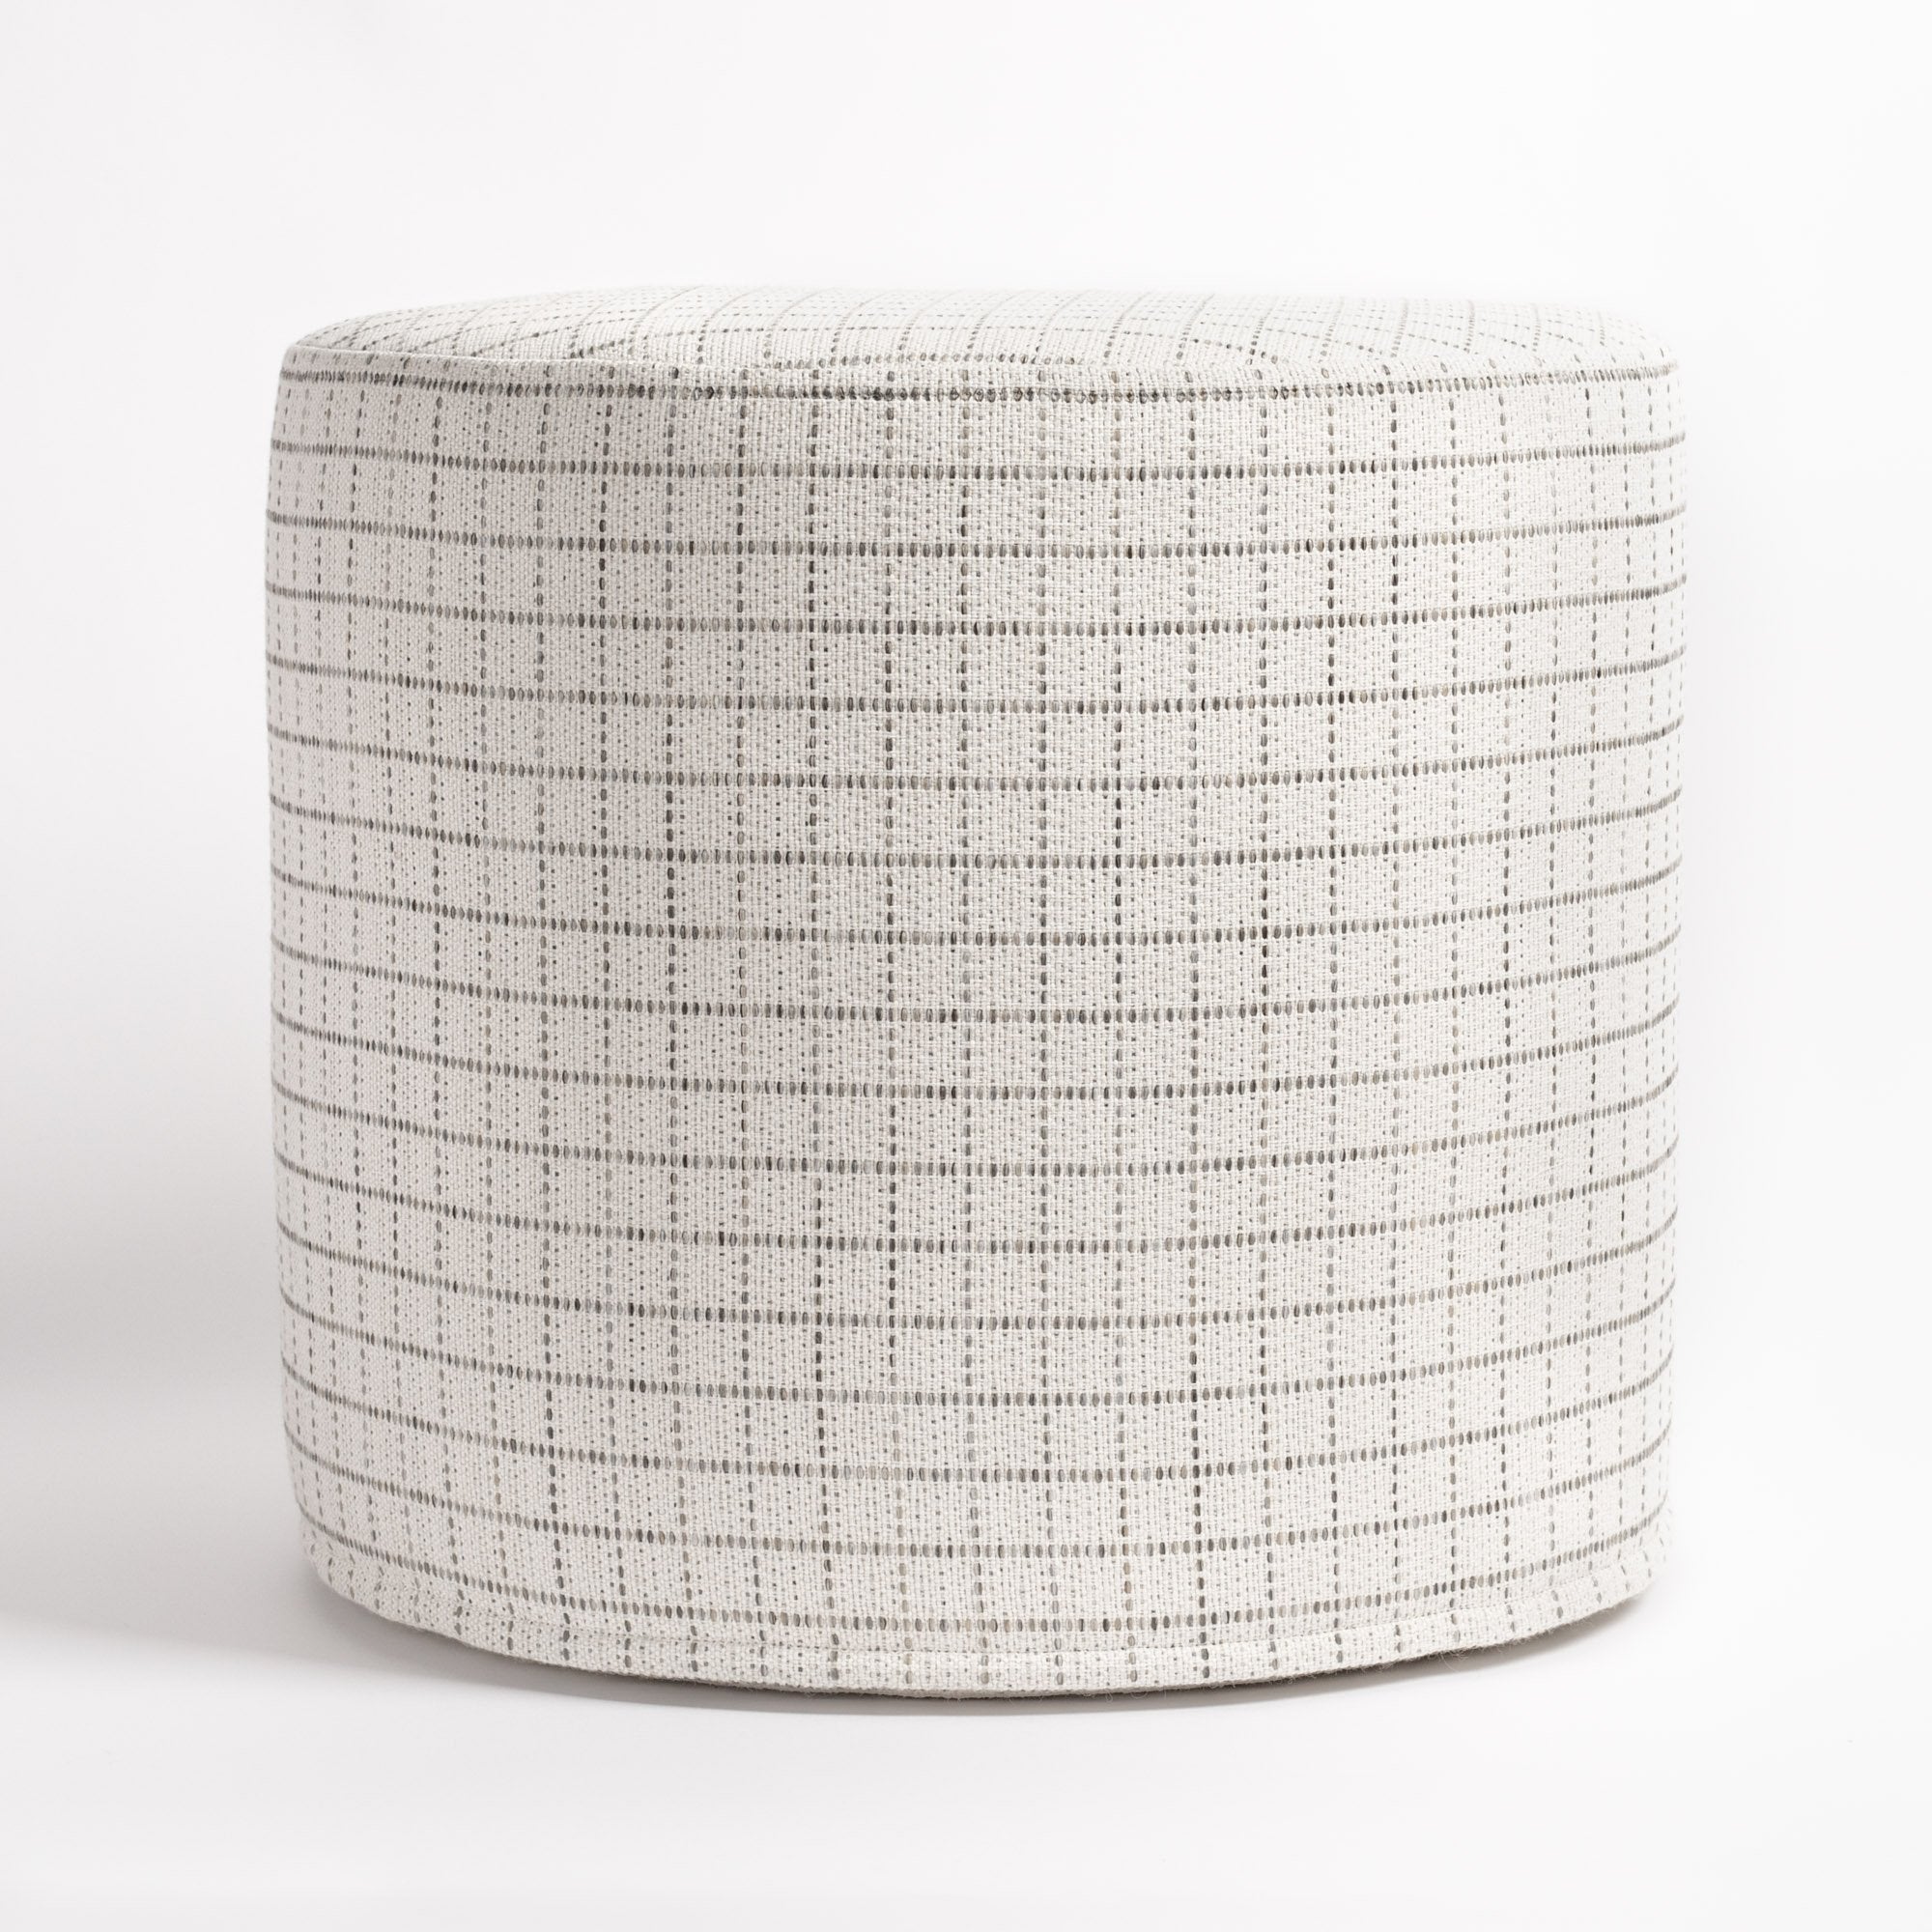 Keely Check Birch Ottoman, a cream and grey windowpane check round ottoman : side view